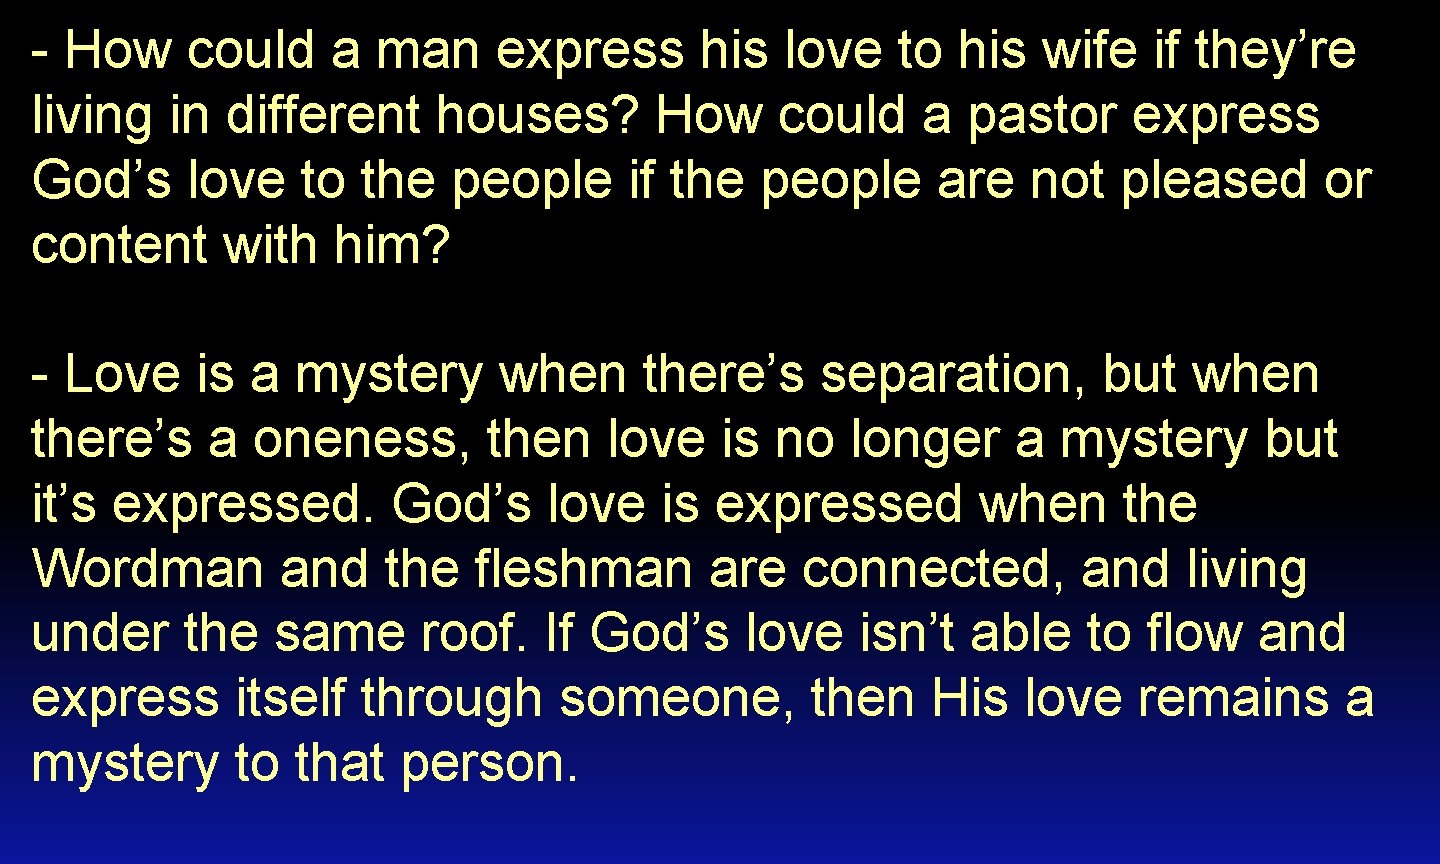 - How could a man express his love to his wife if they’re living